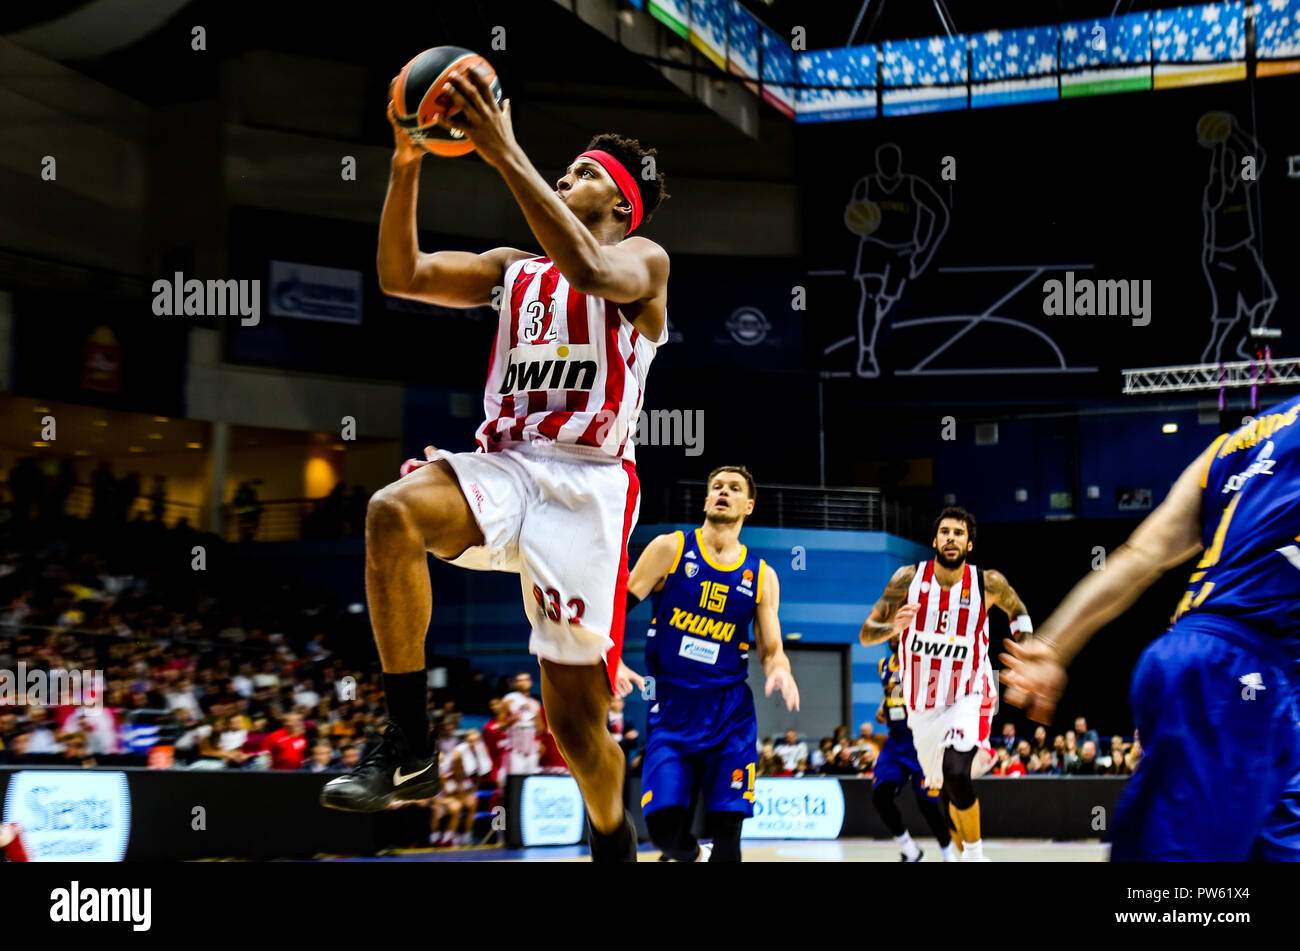 Khimki Moscow Basketball High Resolution Stock Photography and Images -  Alamy